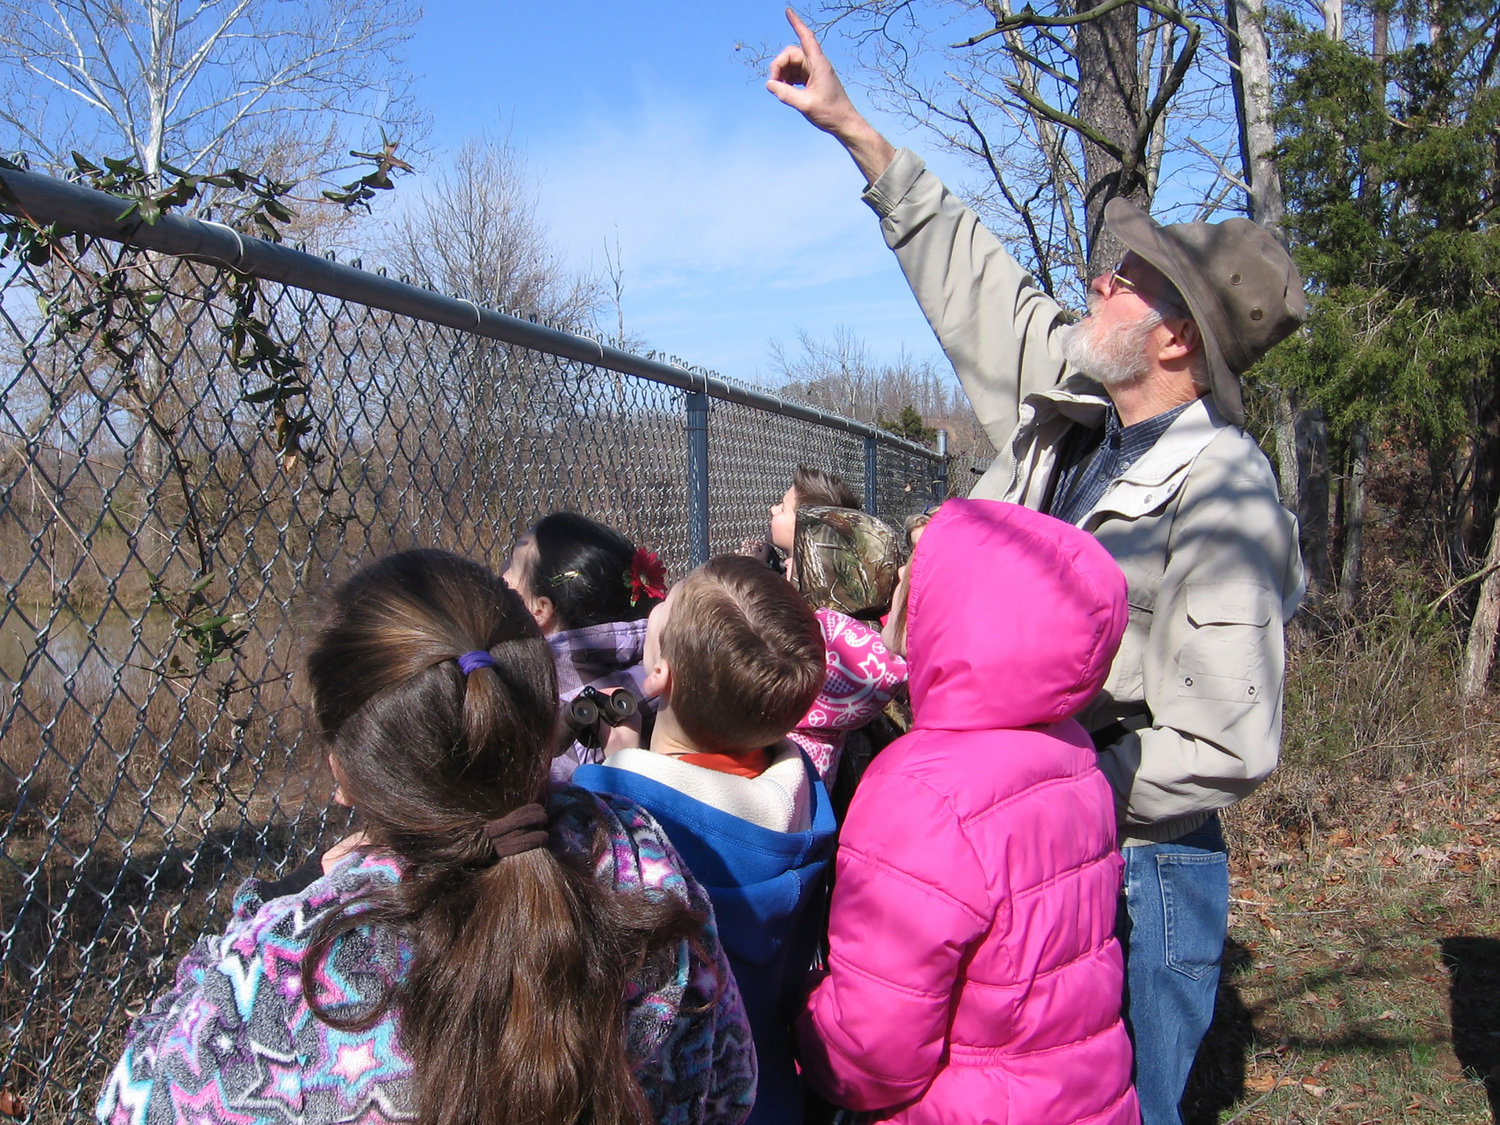 This image provided by Steve Kistler shows Kistler teaching third-graders at the Cub Run, Kentucky, Elementary School about birds during the Great Backyard Bird Count in February 2012. The count is a citizen science project that collects data used by researchers to track bird populations.